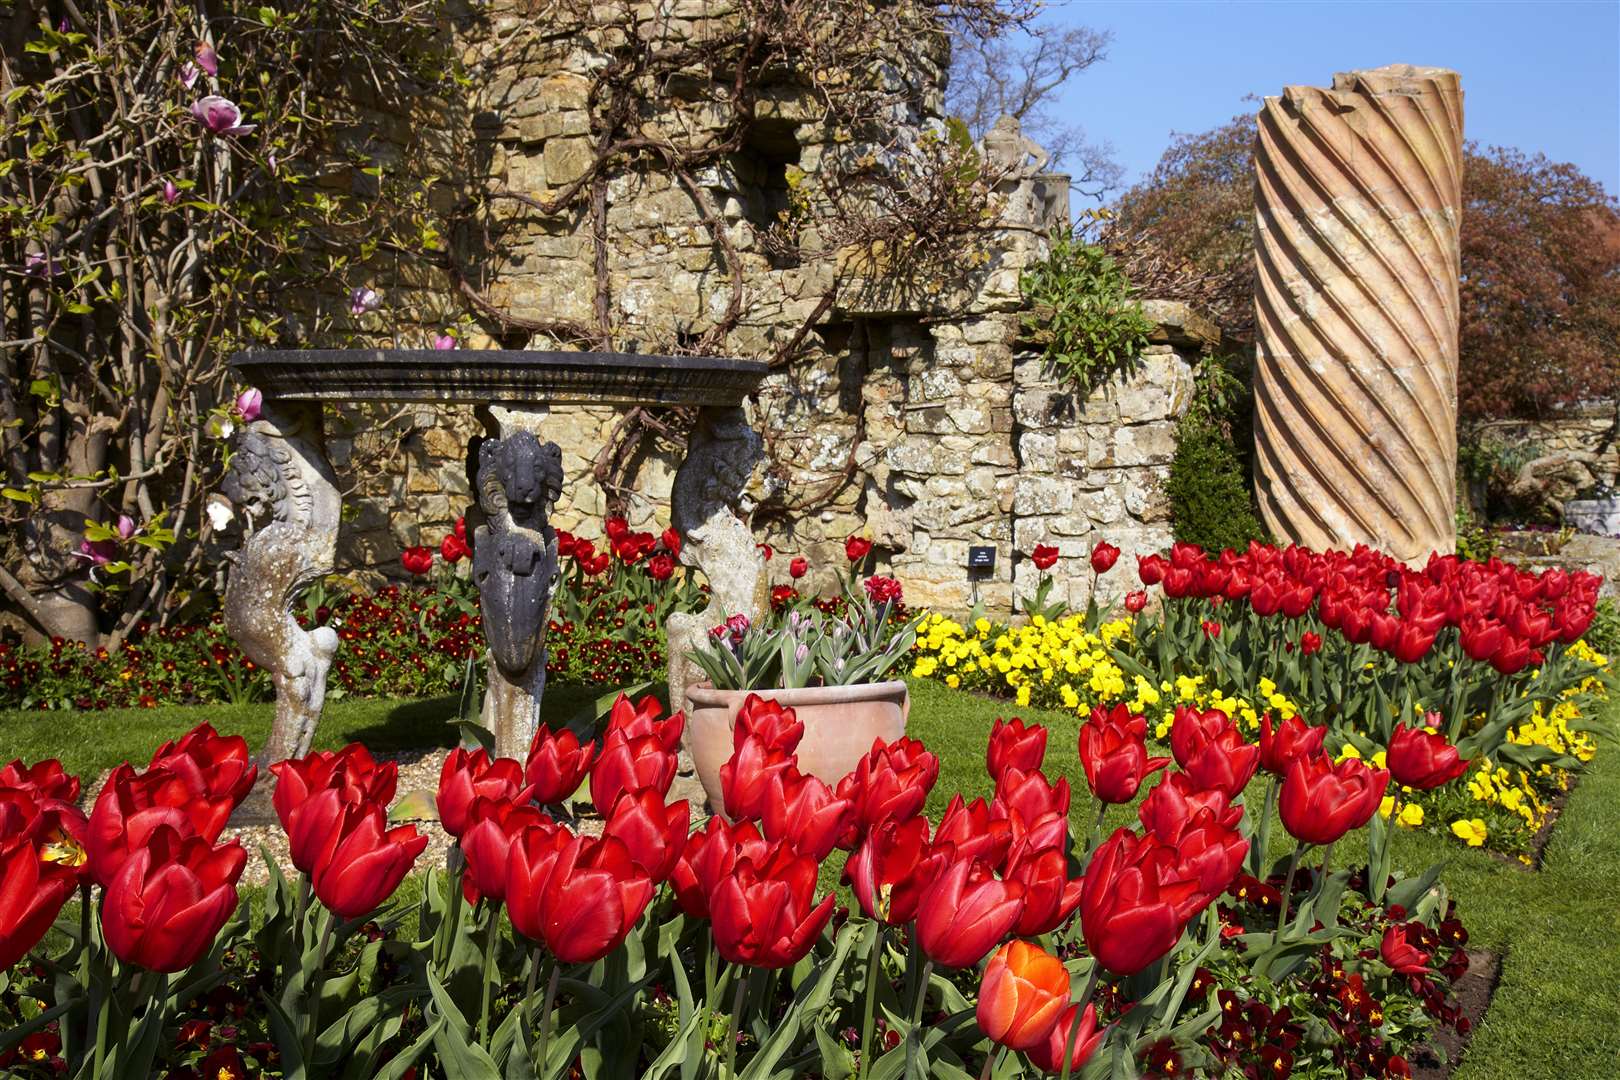 Tulips have started springing up in the gardens